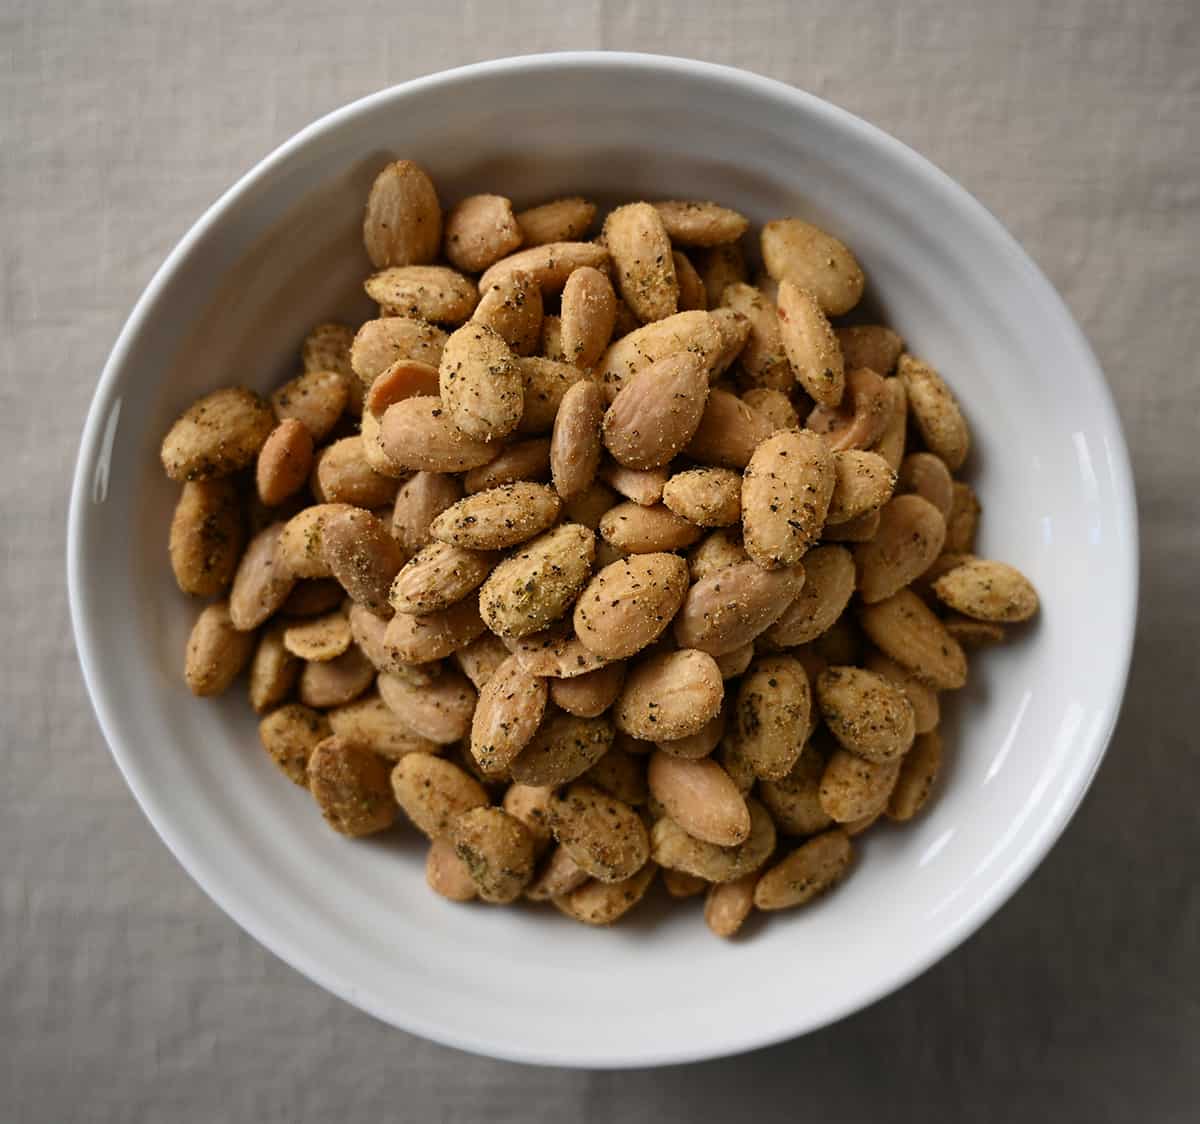 Top down image of a bowl of roasted garlic & herb almonds. 